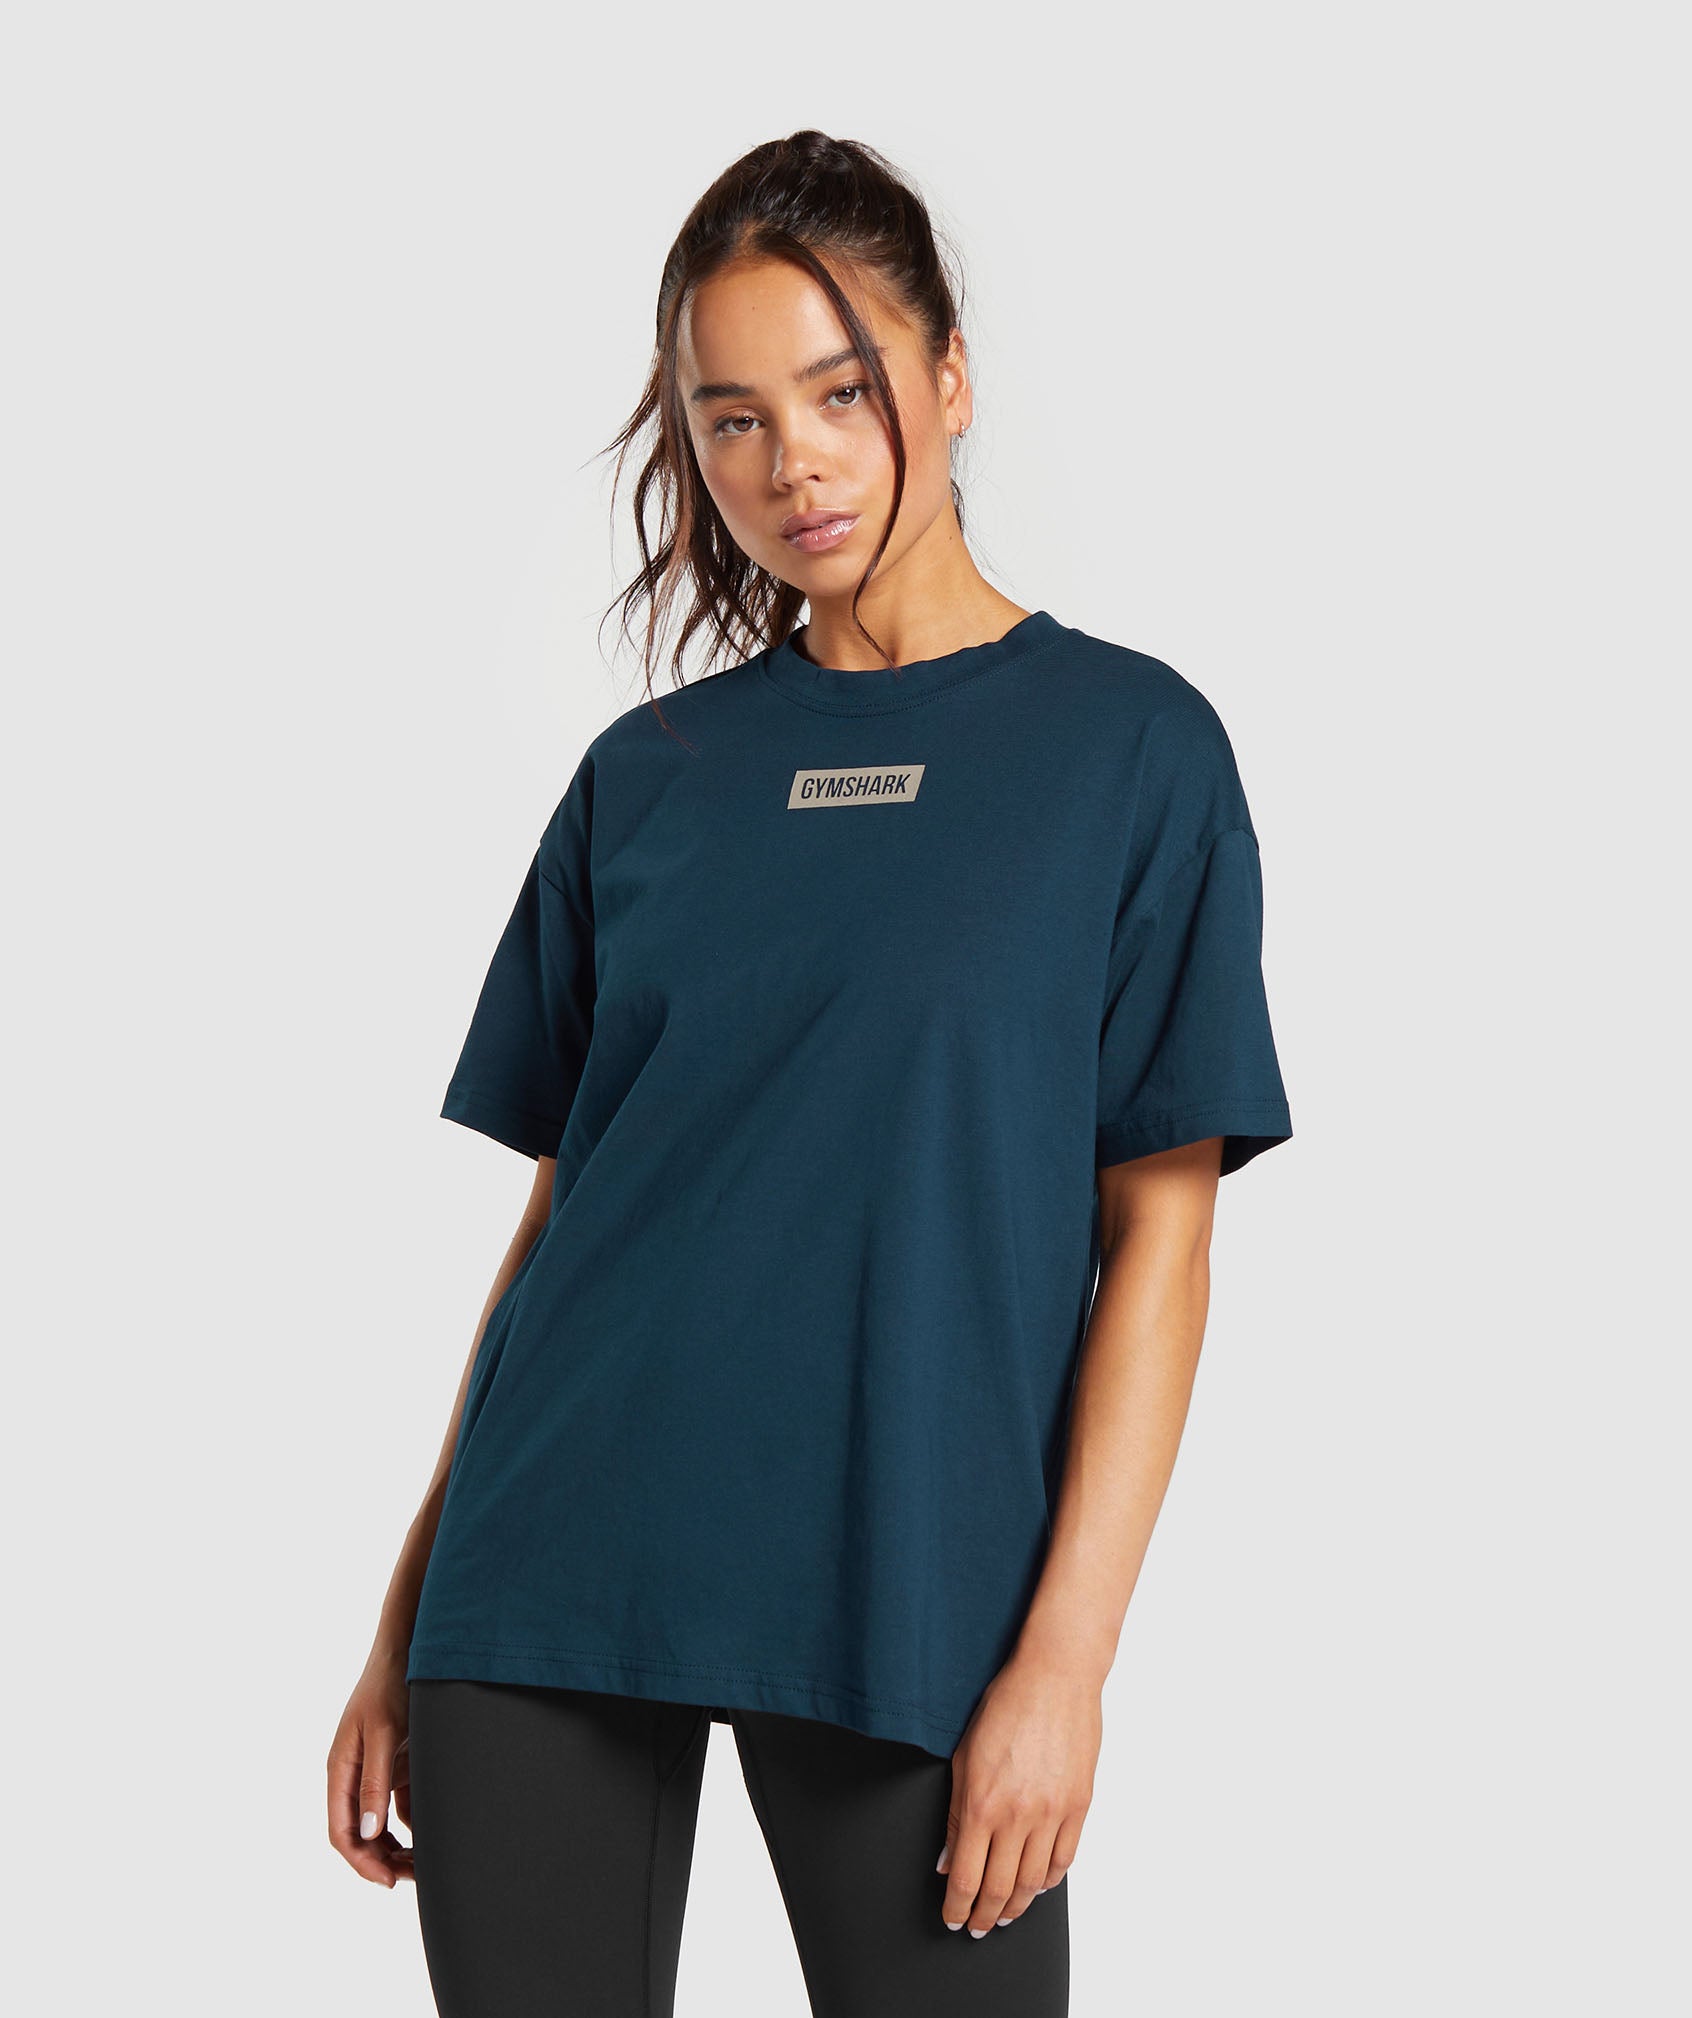 Block Oversized T-Shirt in Navy is out of stock